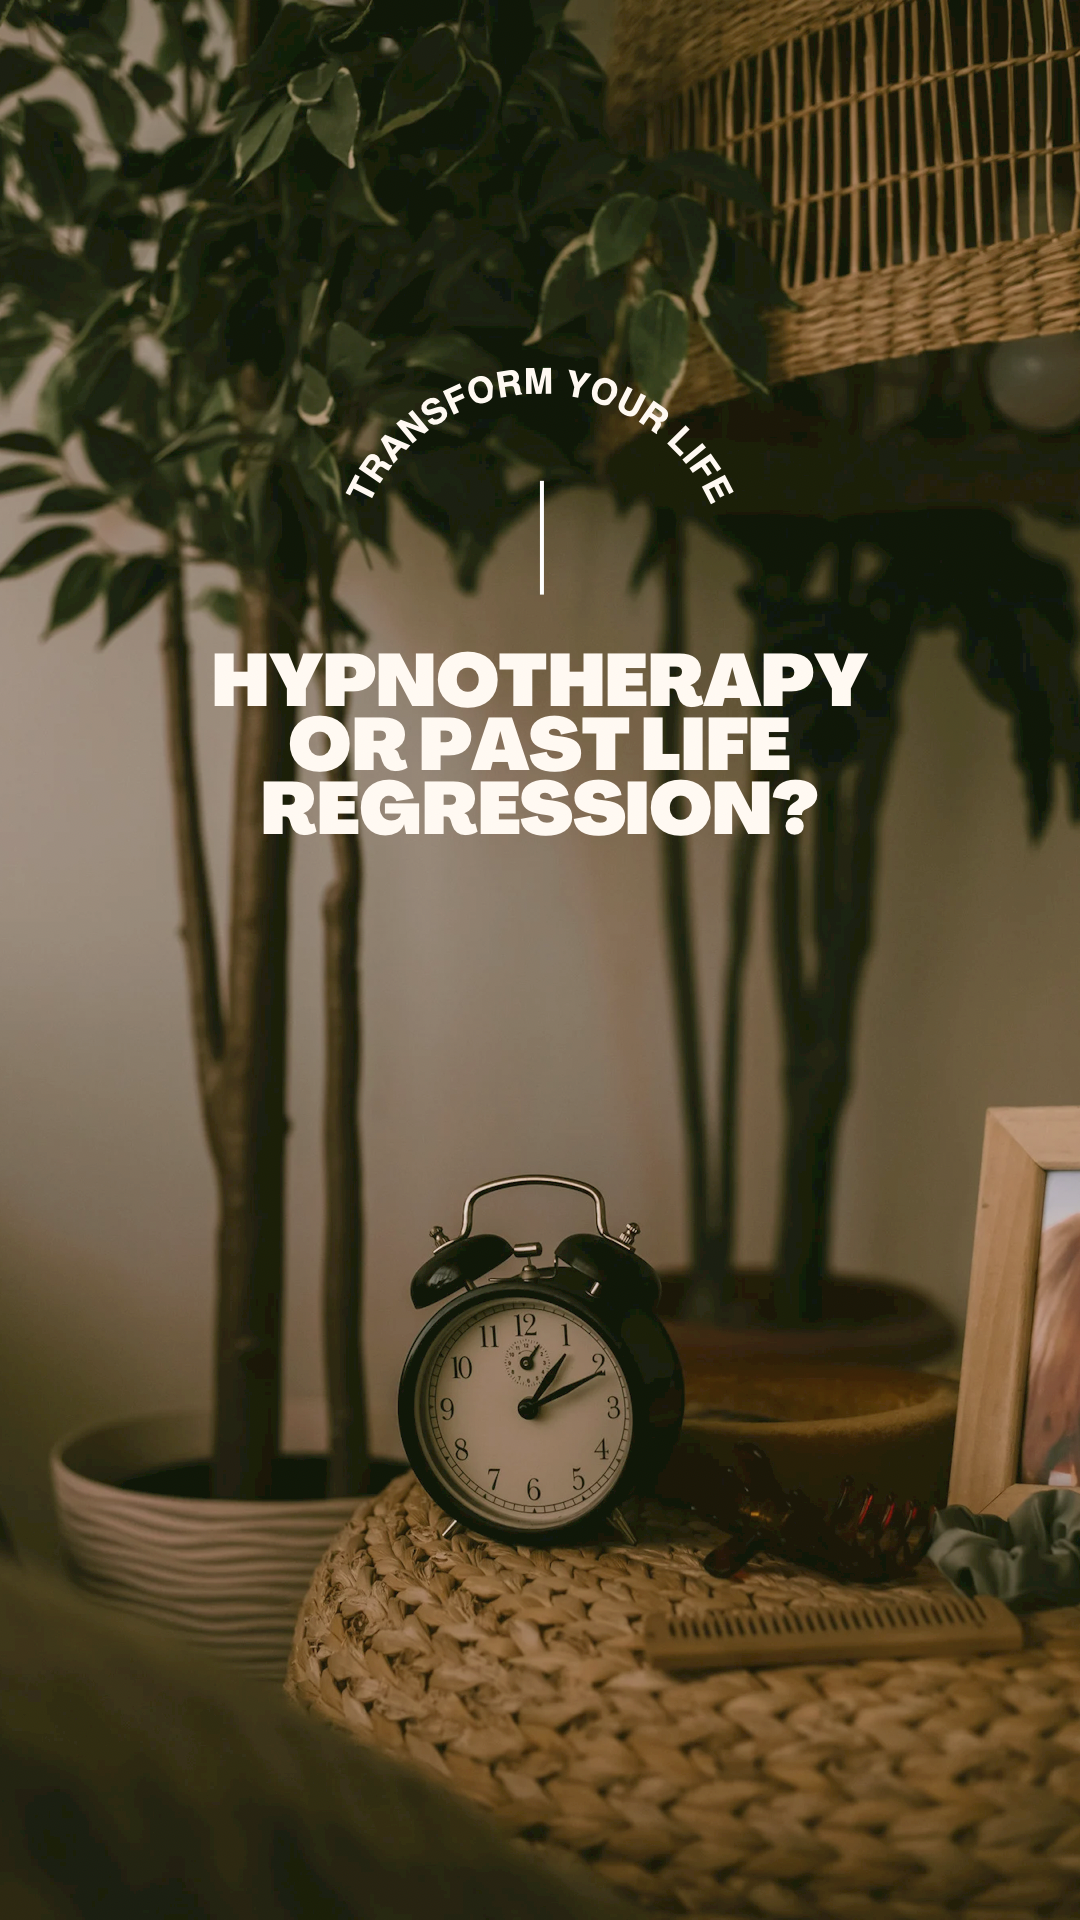 What are the differences between Hypnotherapy and Past Life Regression?